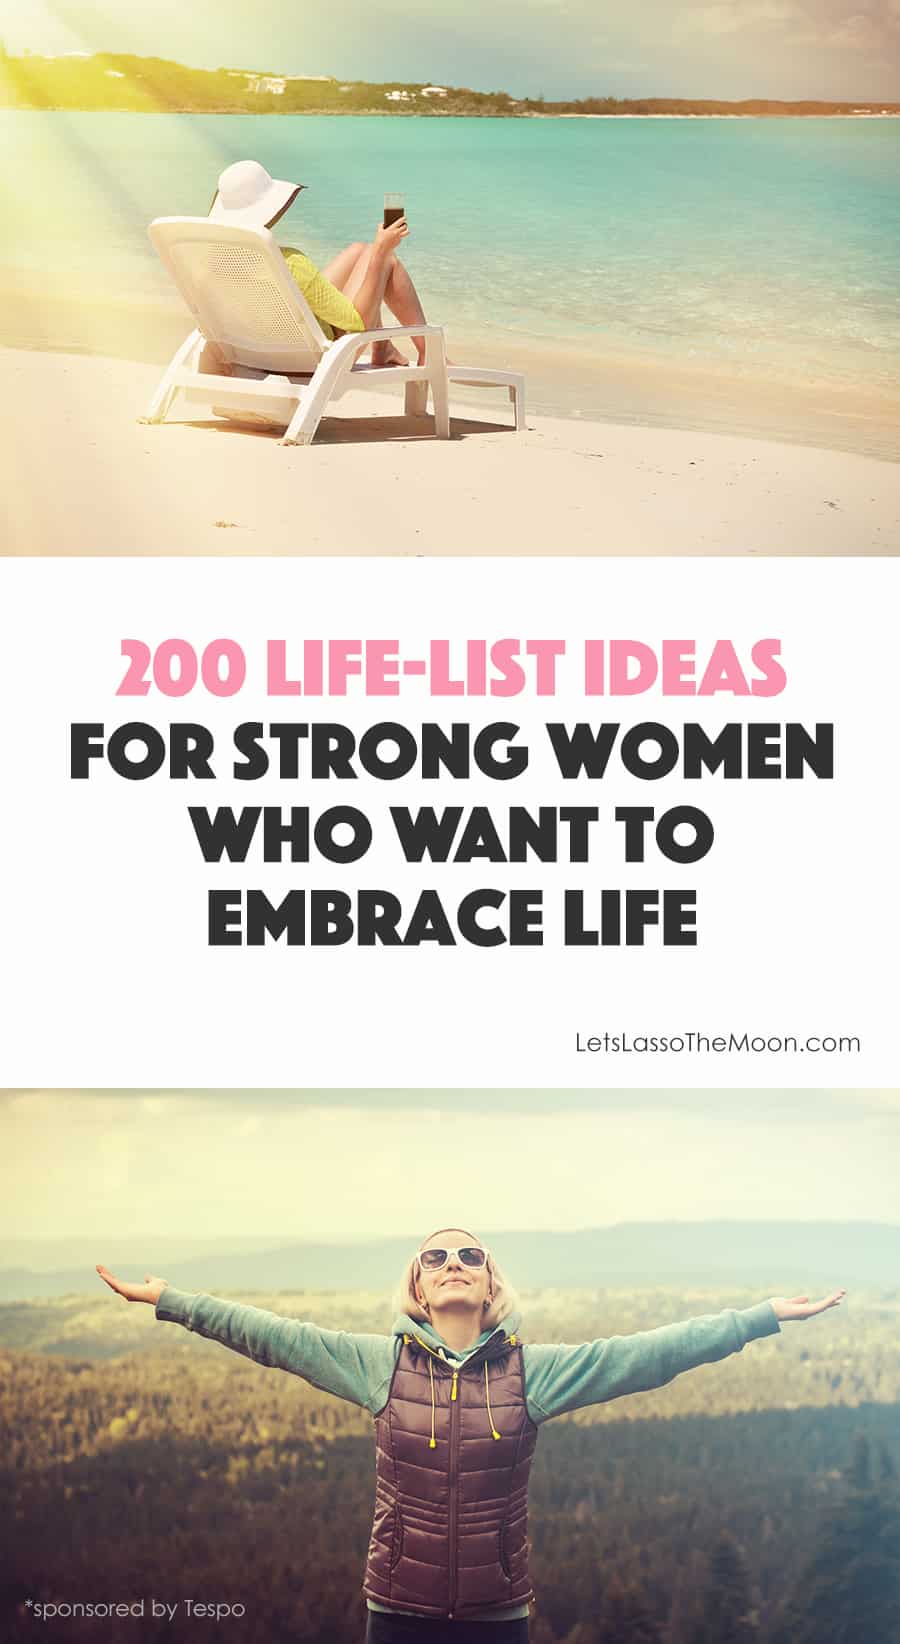 200 life-list ideas for women who want to embrace life *If you're thinking of writing a bucket list, this is a great starting point